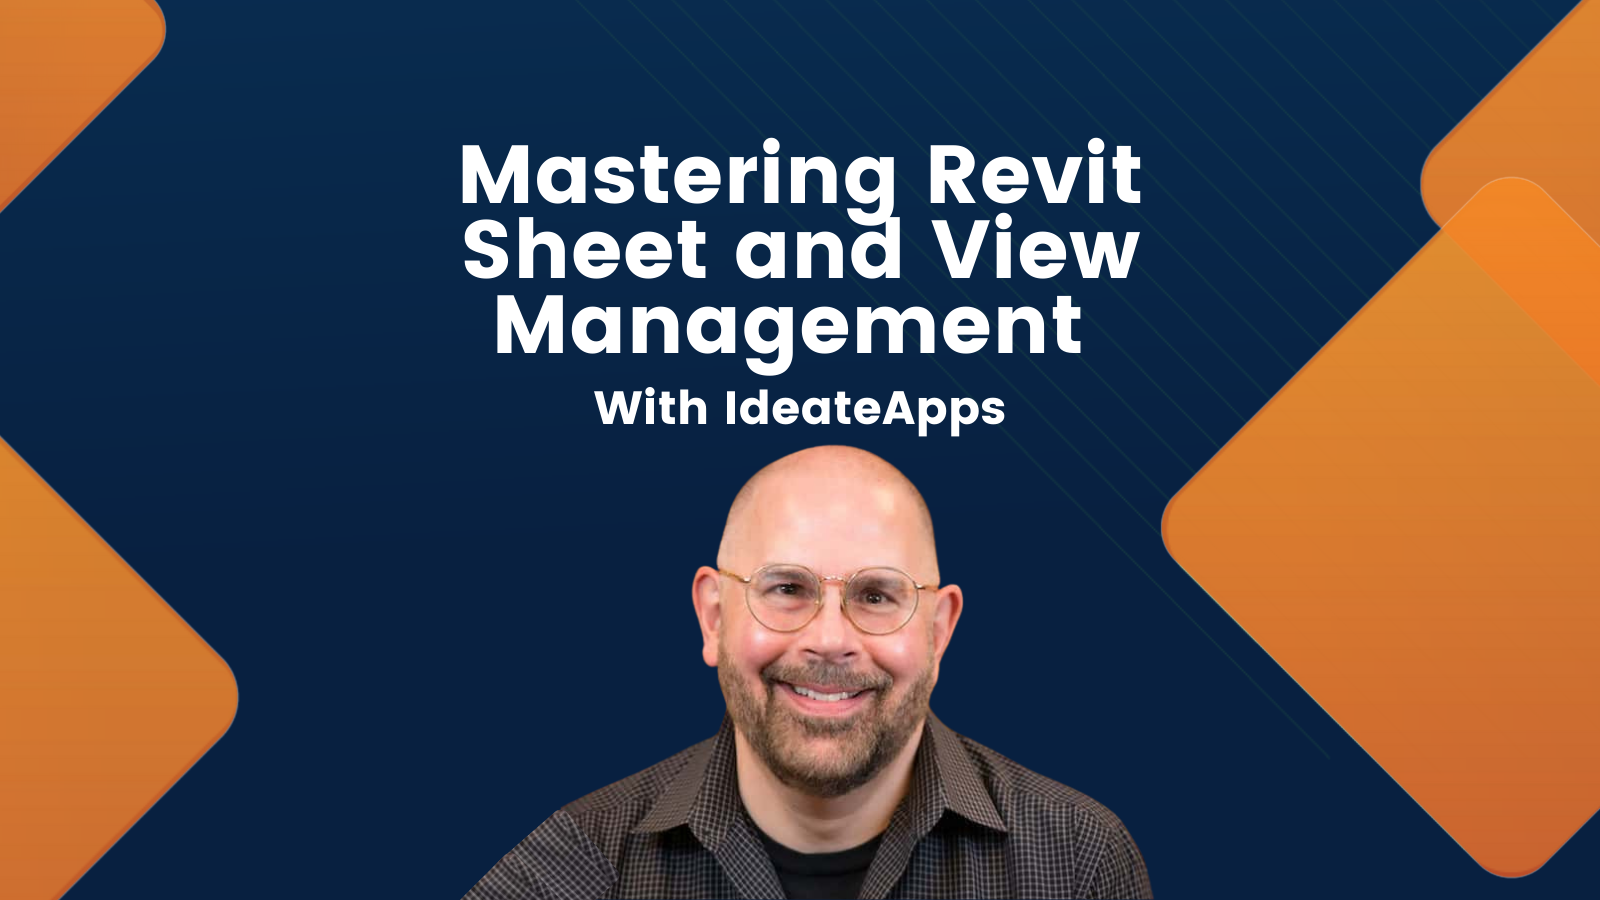 Mastering Revit Sheet and View Management with IdeateApps